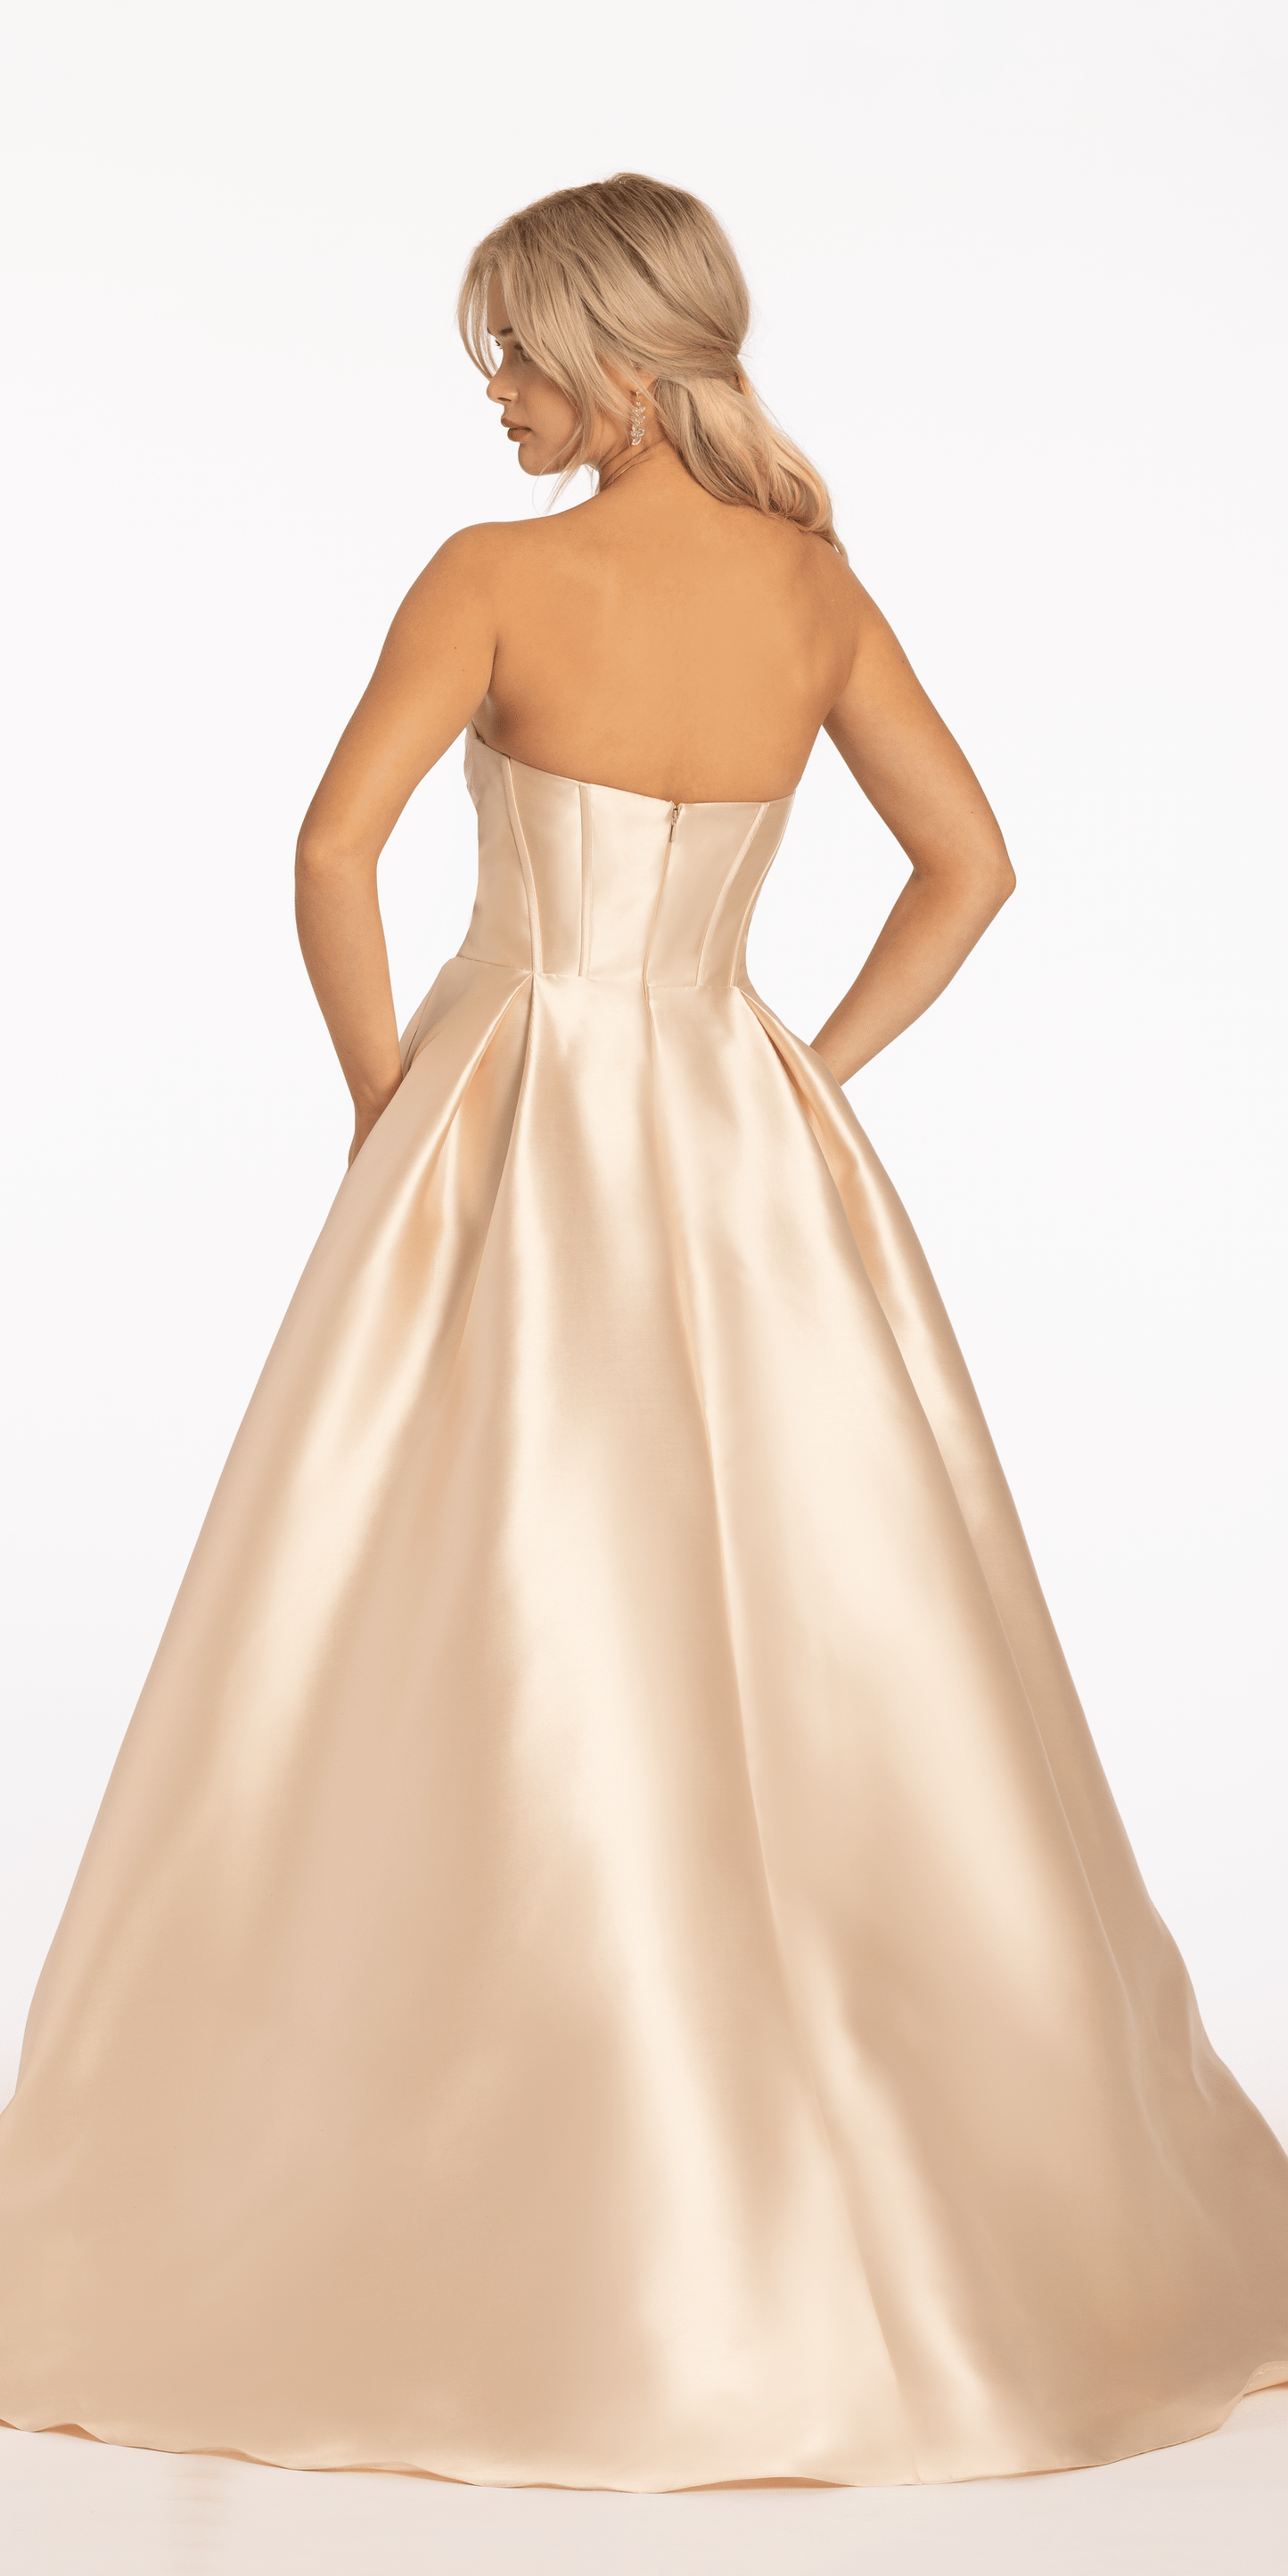 Camille La Vie Pleated Mikado Beaded Ballgown with Pockets